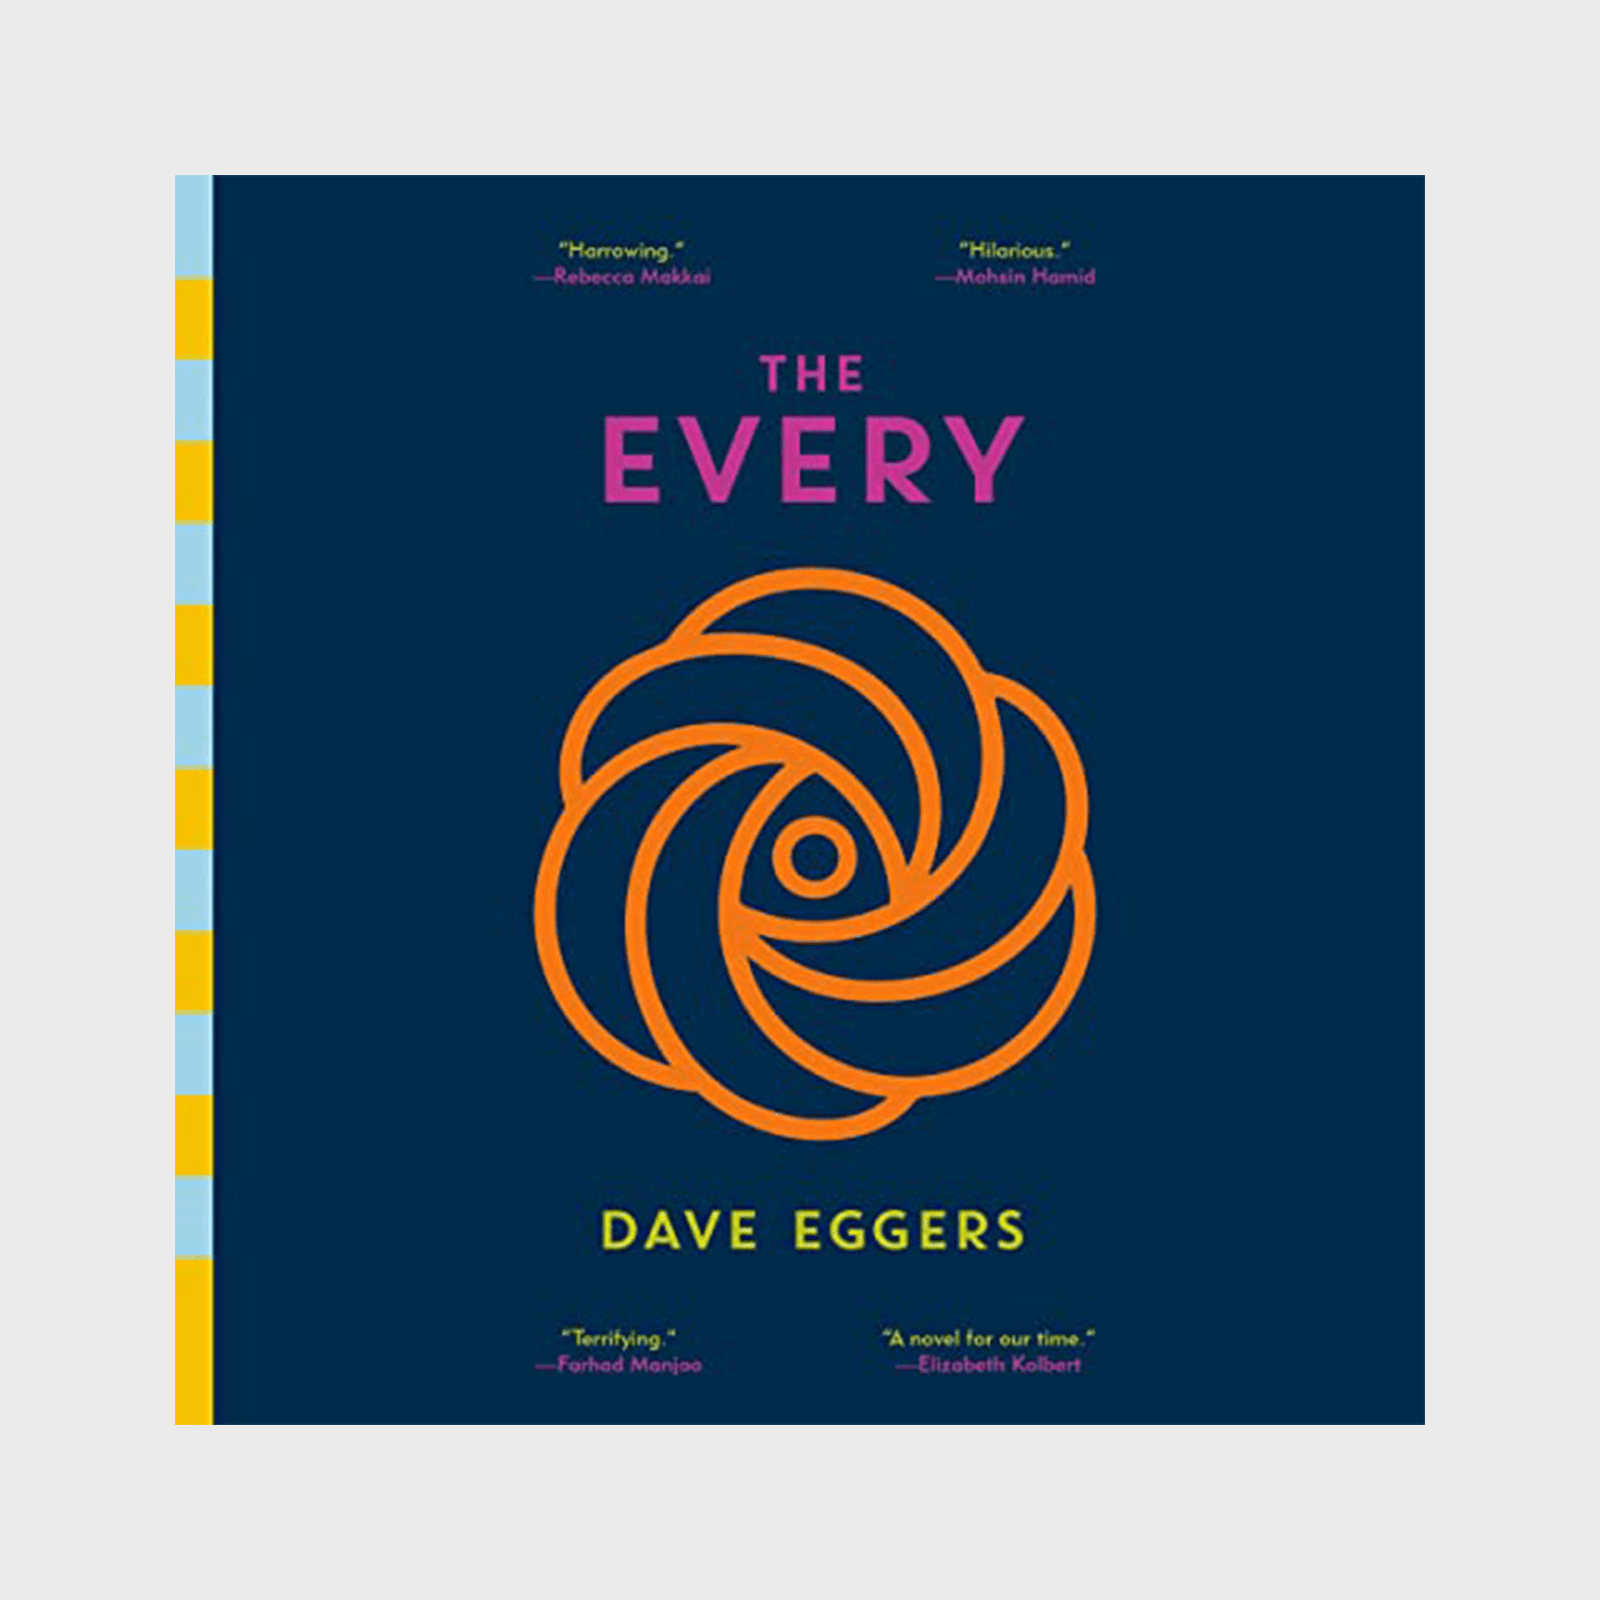 <h3 class=""><strong><em>The Every</em> by Dave Eggers</strong></h3> <p>What would happen if the world's largest and most influential Internet company merged with the world's most dominant e-commerce site? Would it bring a sense of order to our chaotic world, or would it mean the final days of free will? Either way, life as we know it would be over. Welcome to <a href="https://www.amazon.com/The-Every-A-Novel/dp/B08WYHMCR3/" rel="noopener noreferrer"><em>The Every</em></a>. Tucked away on its own island, this massive company is rife with surveillance, outlandish outfits, and the overall devolution of our species. Delaney Wells is determined to take it down from the inside with the help of her friend, Wes Makazian. Audie Award winner Dion Graham narrates this dystopian novel, which raises questions about memory, history, privacy, democracy, and the limits of human knowledge. It could end up being one of the <a href="https://www.rd.com/list/books-that-predicted-the-future/" rel="noopener noreferrer">books that predicted the future</a>.</p> <p class="listicle-page__cta-button-shop"><a class="shop-btn" href="https://www.amazon.com/The-Every-A-Novel/dp/B08WYHMCR3/">Shop Now</a></p>